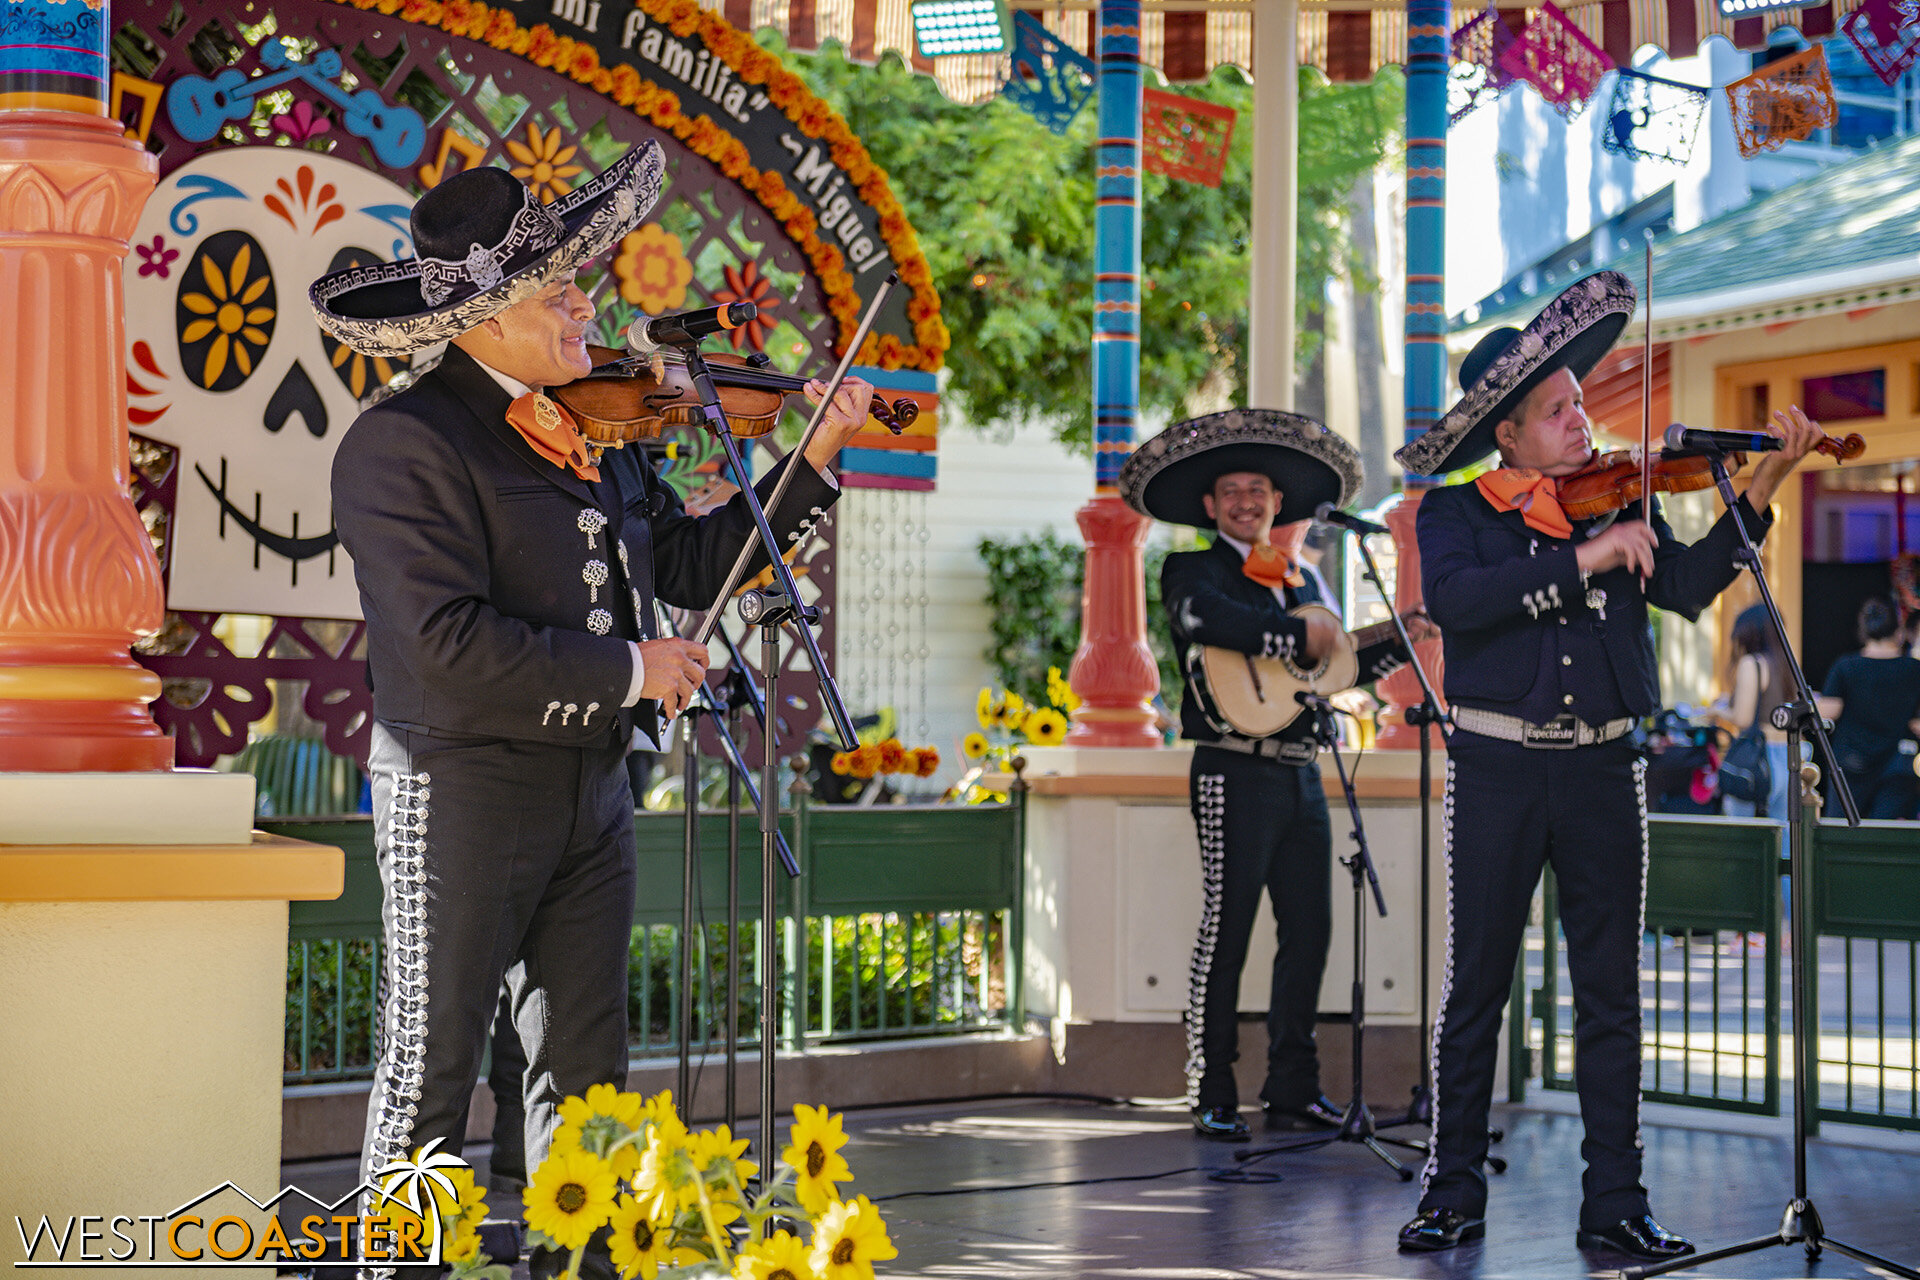  At the Paradise Garden Bandstand, guests can enjoy live music from Latin bands. 